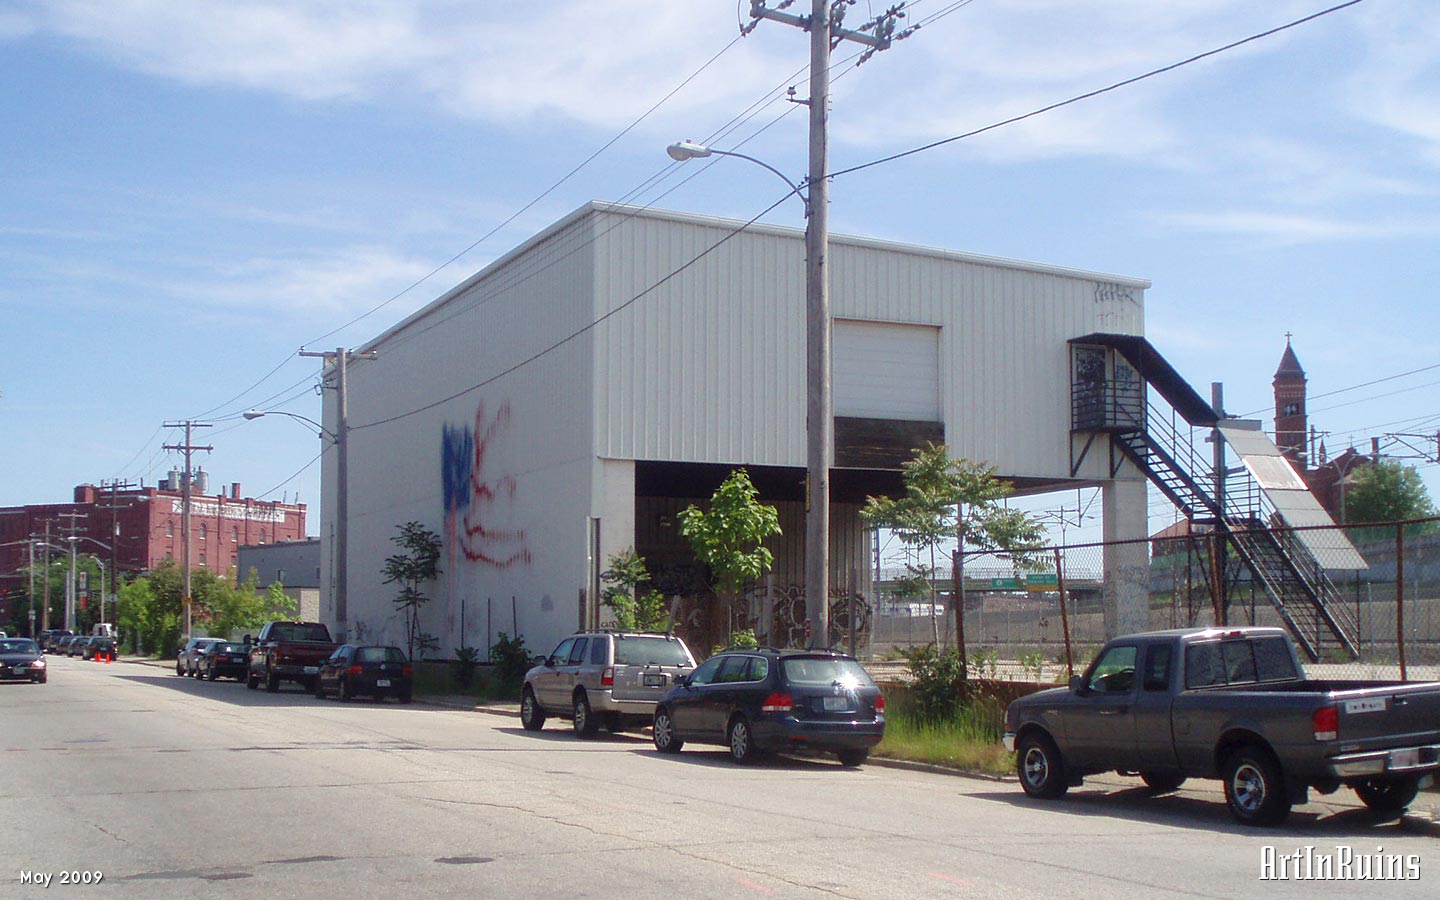 A non-descript 2-story shed along the railroad tracks used for shipping and receiving. Most of the structure is covered in corrugated steel panels and grafitti with an exterior steel stair.